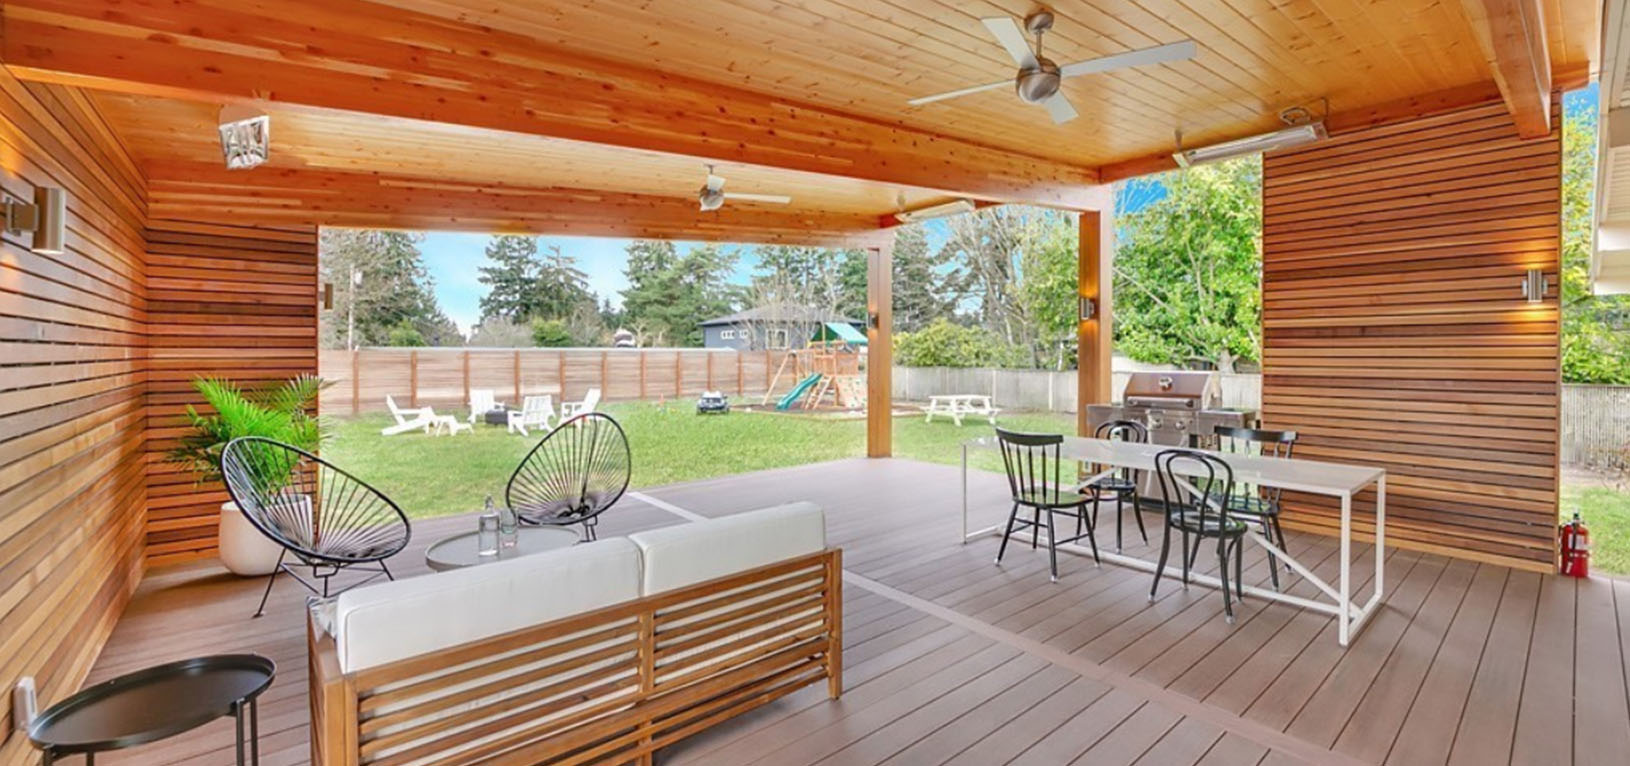 Issaquah Remodeling Contractor, Outdoor Living and Home Additions